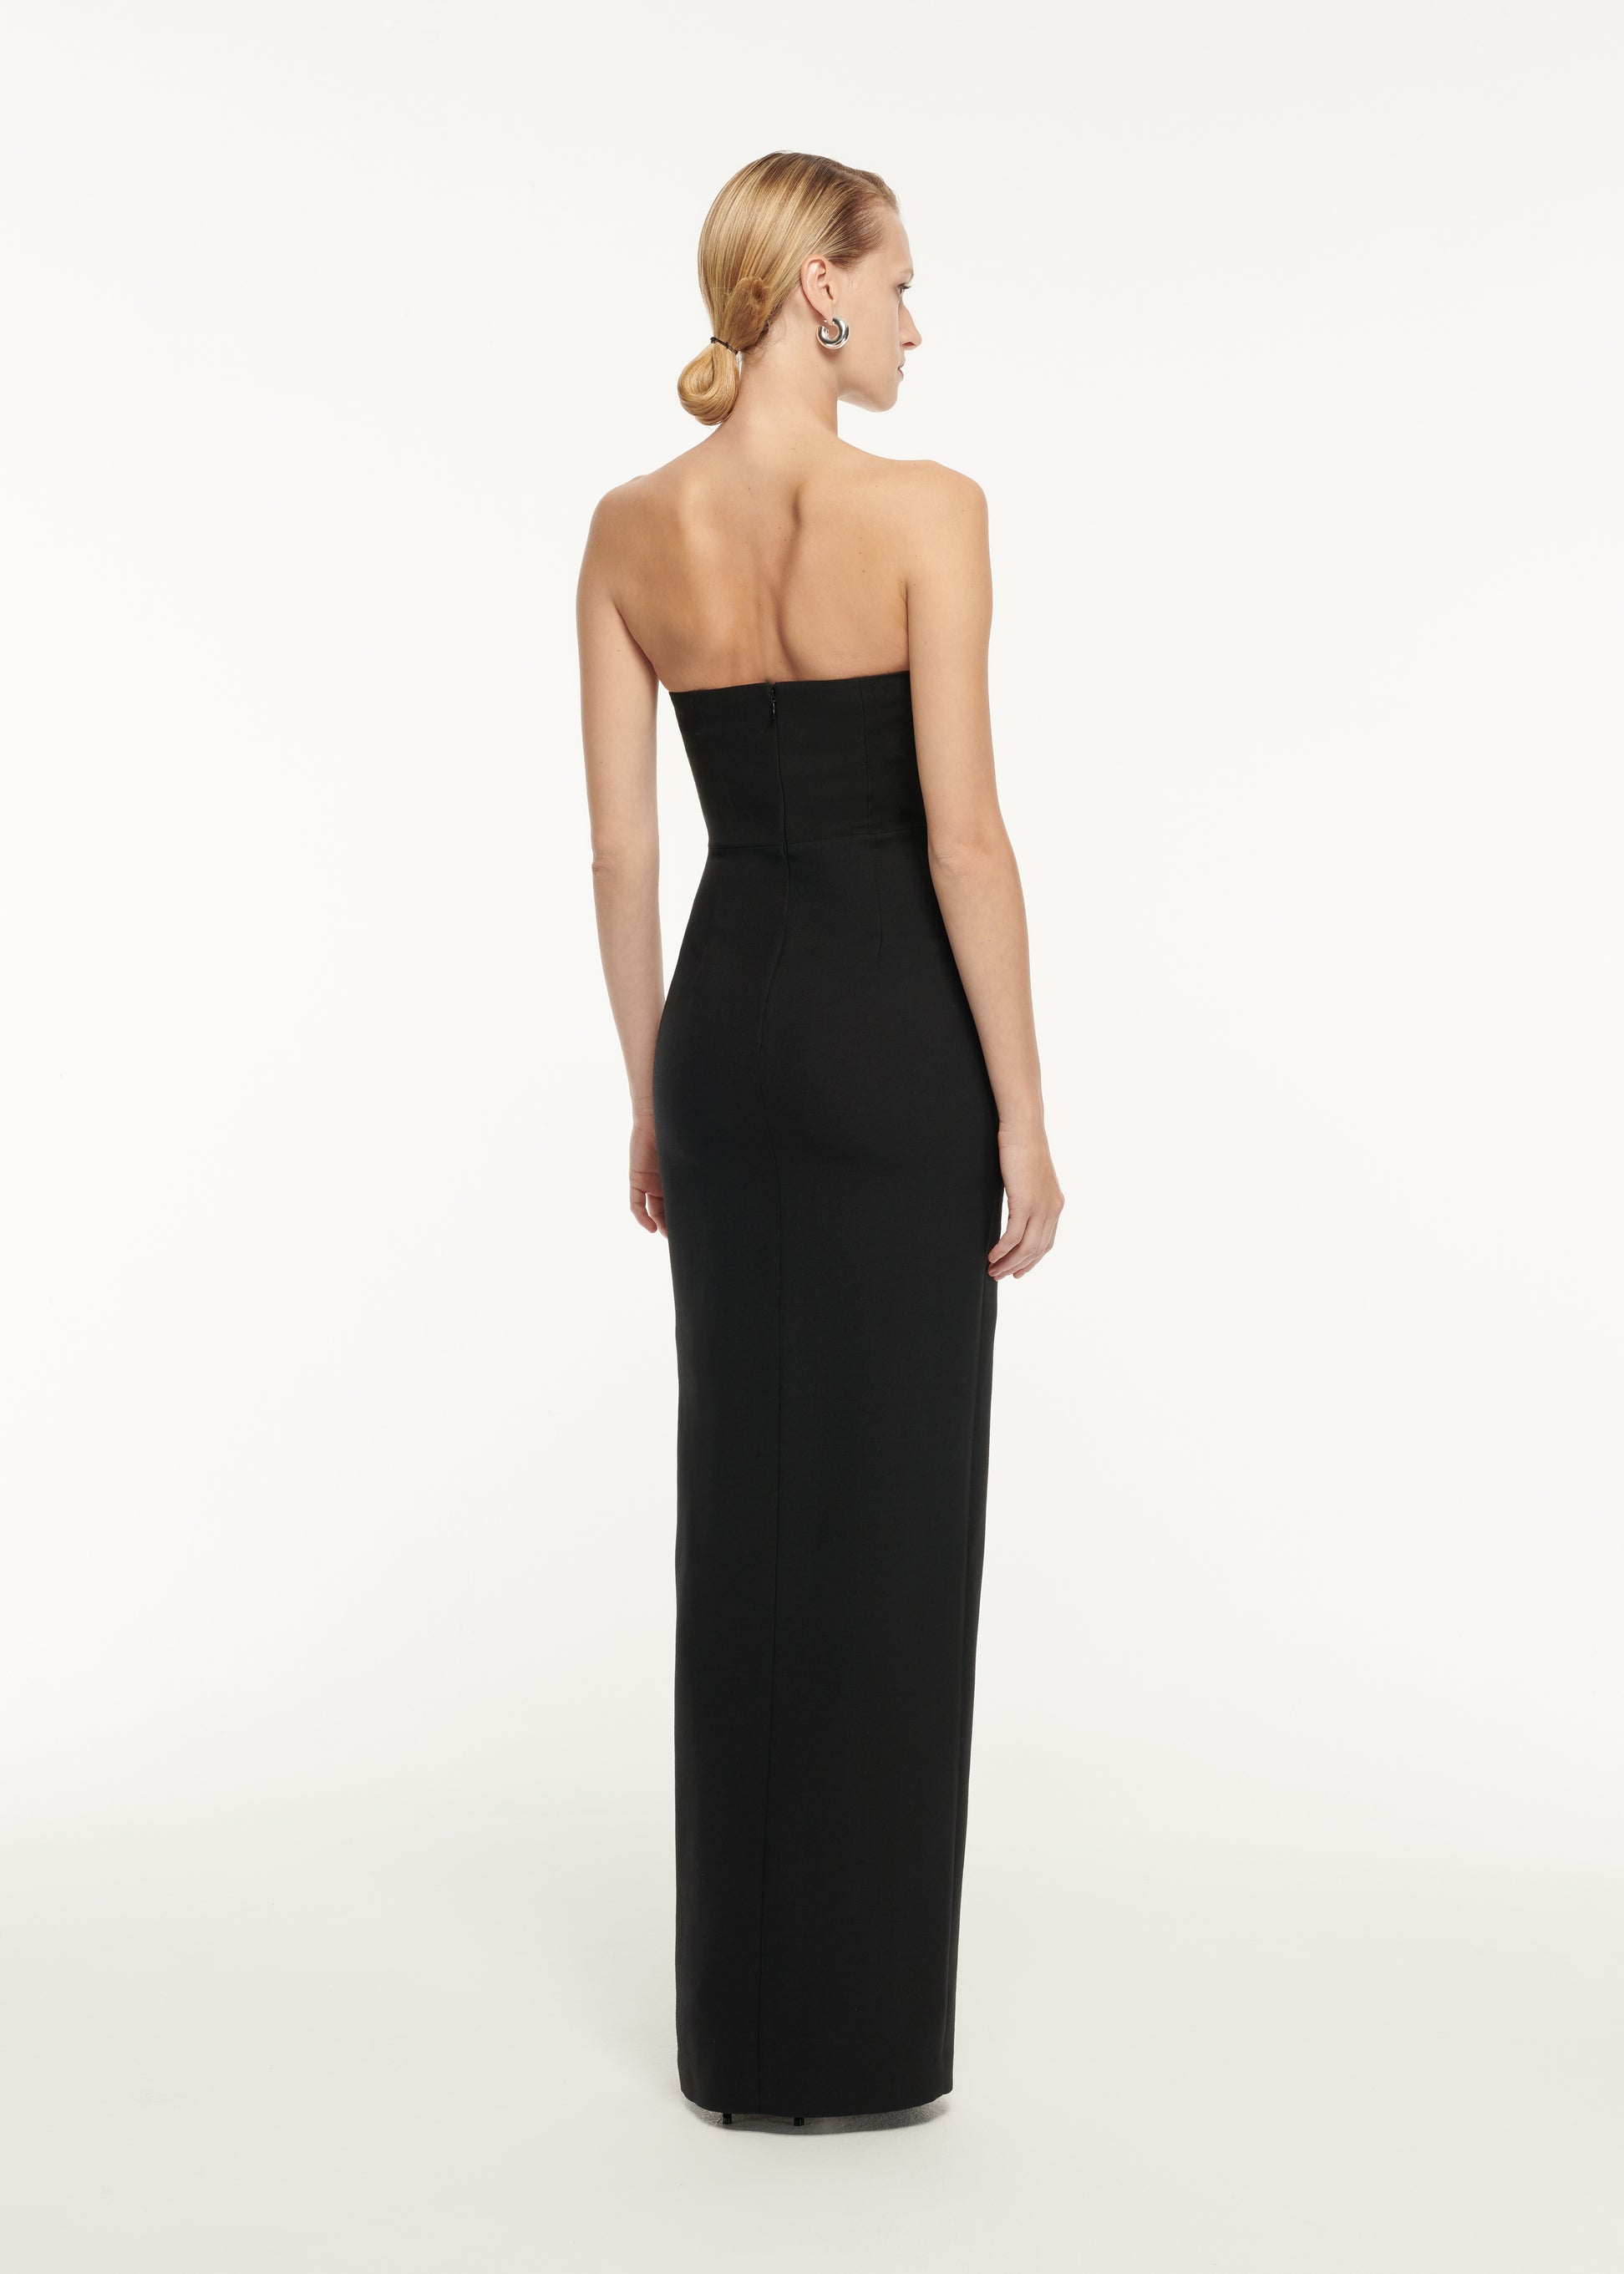 The back of a woman wearing the Strapless Wool Silk Embellished Maxi Dress